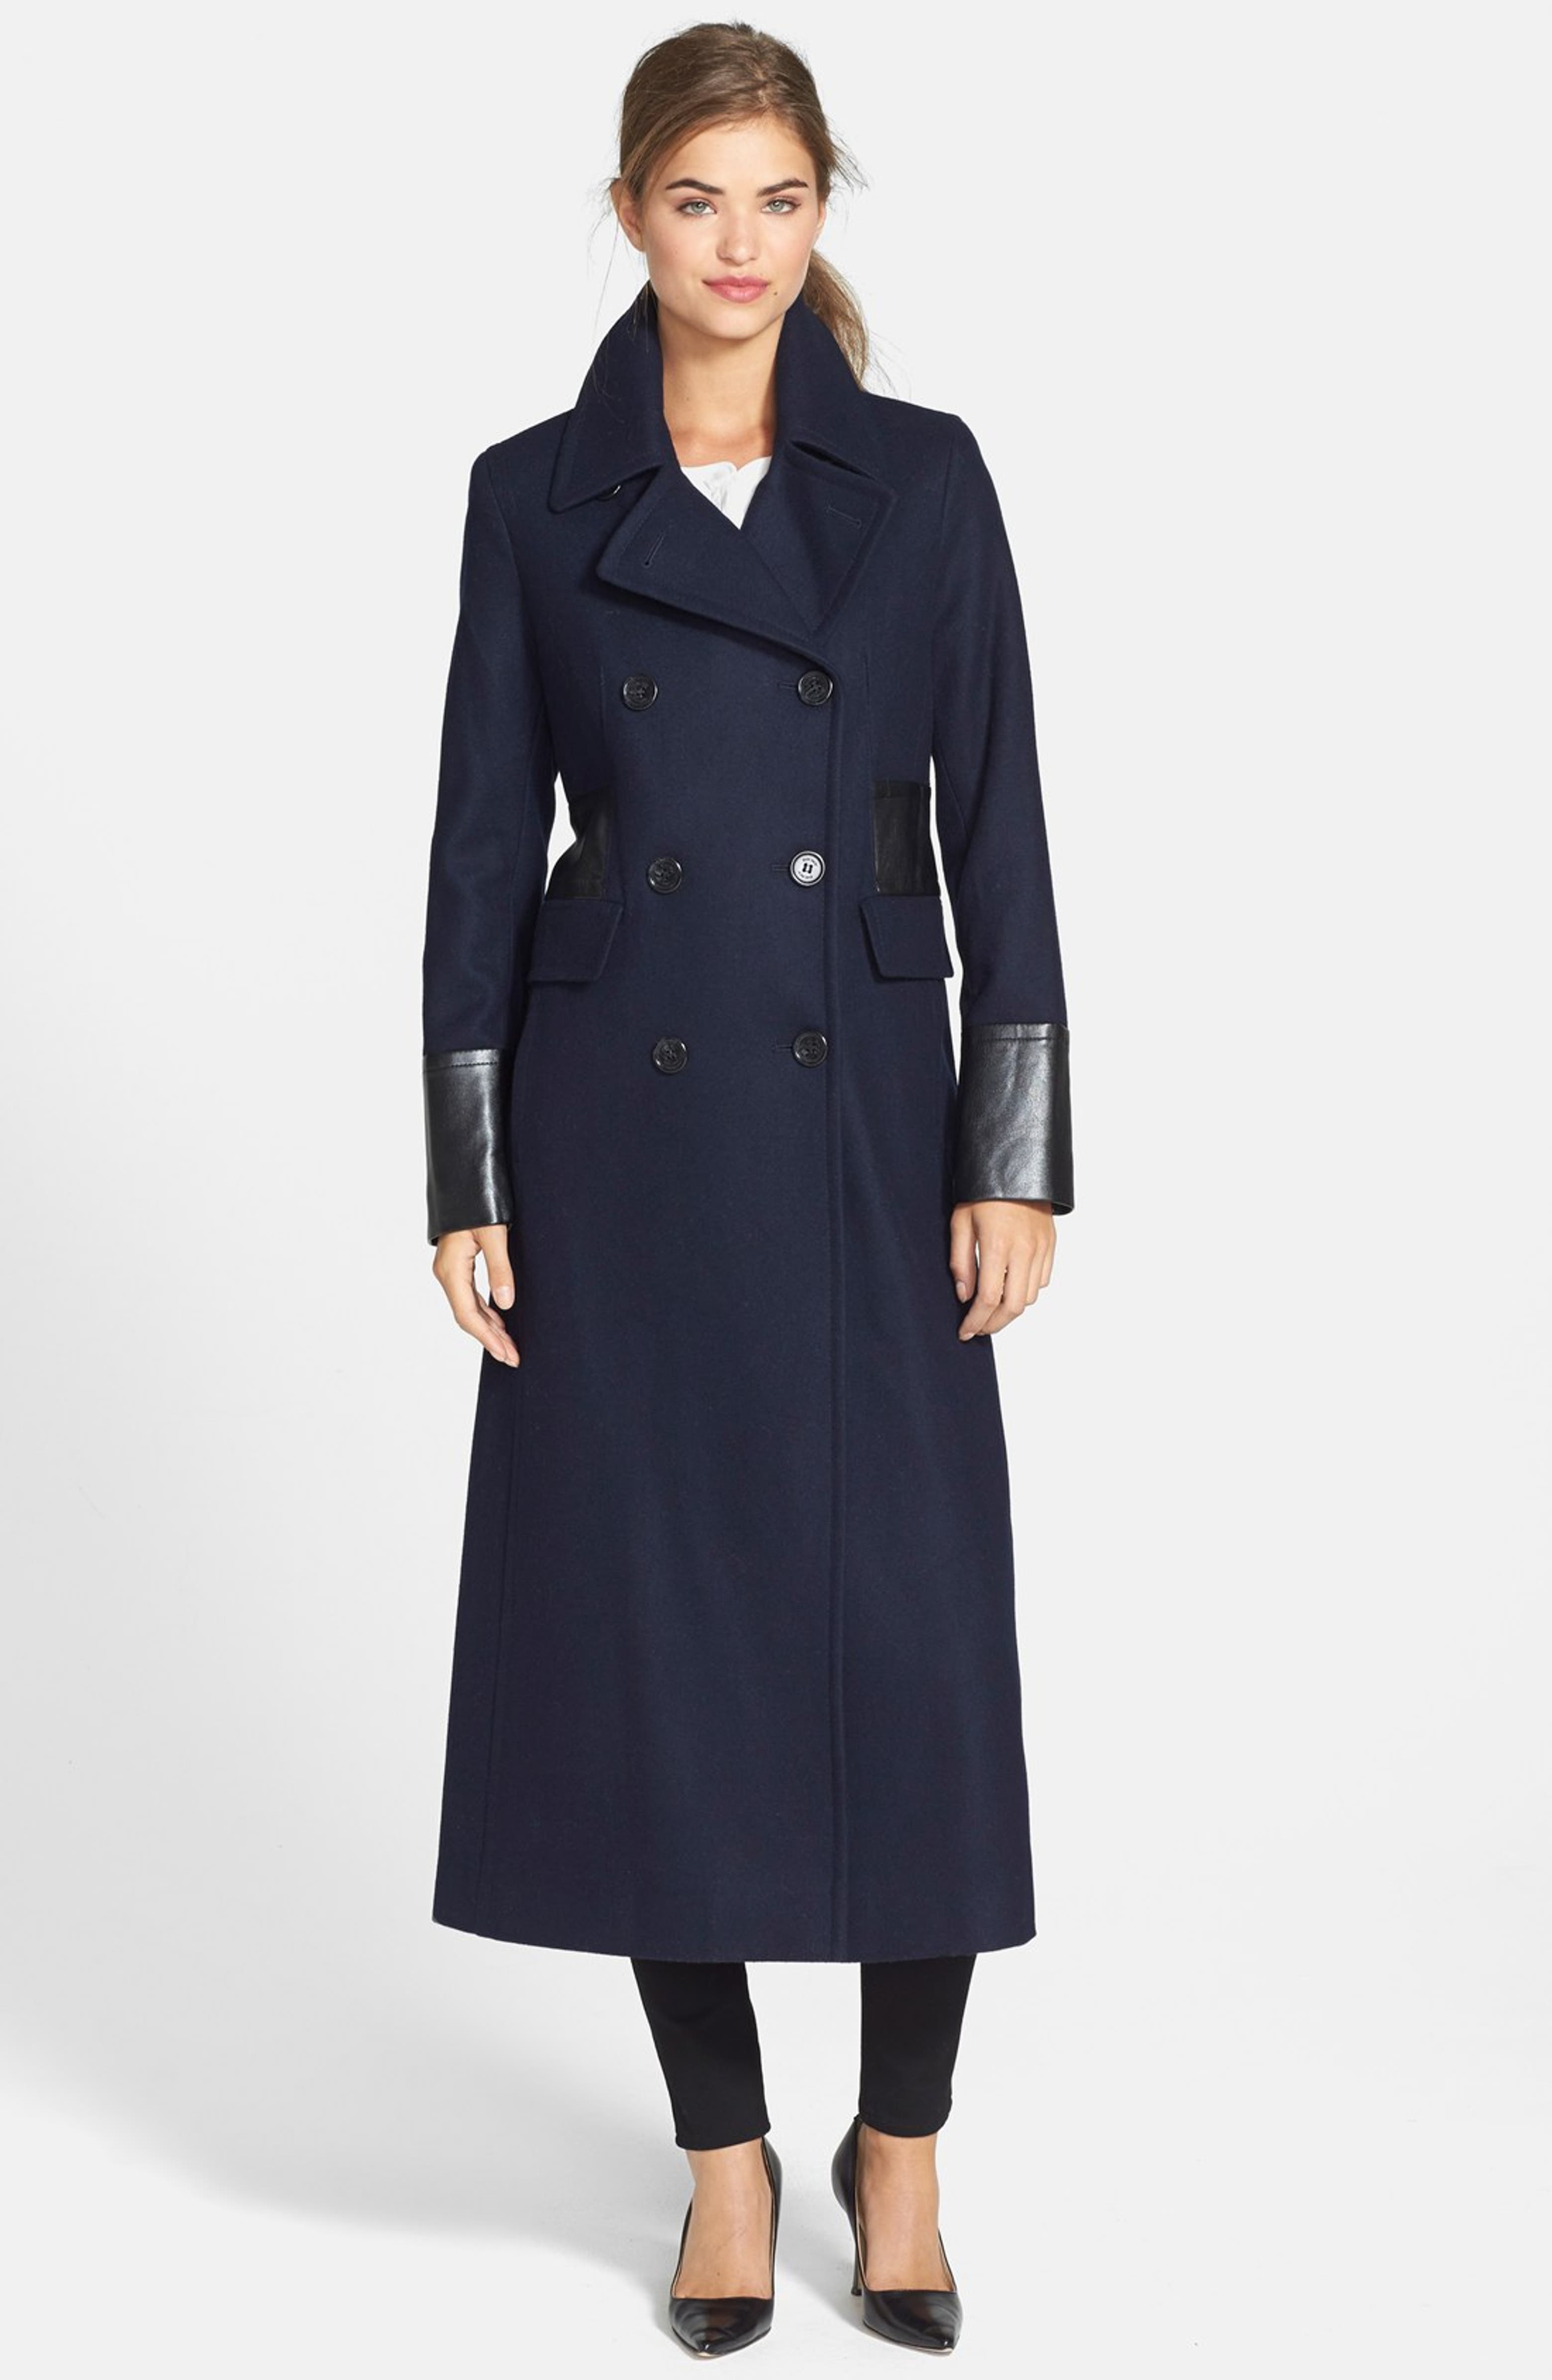 Dkny Long Double Breasted Wool Blend Coat With Faux Leather Trim Nordstrom